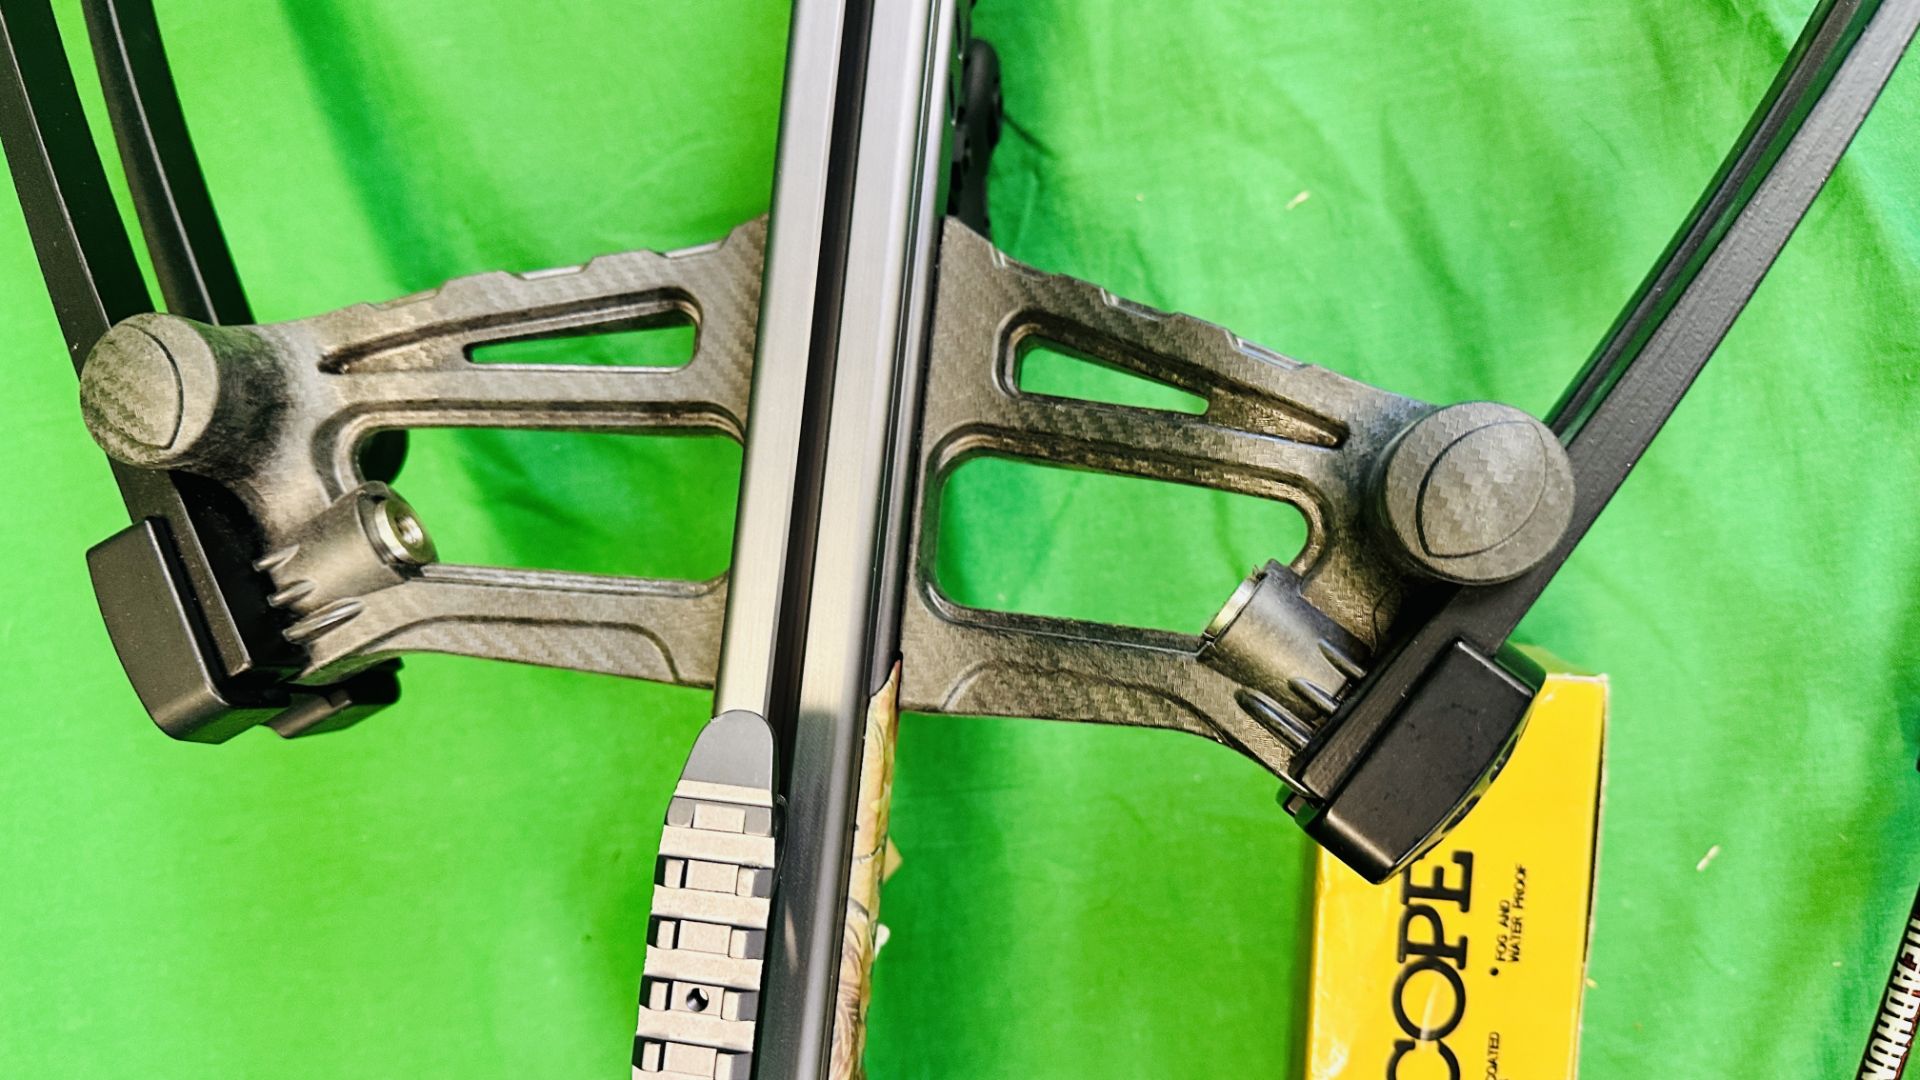 BARNETT "VENGANCE" COMPOUND CROSSBOW COMPLETE WITH THREE CARBON FIBRE CROSSBOW BOLTS, QUIVER, - Image 13 of 35